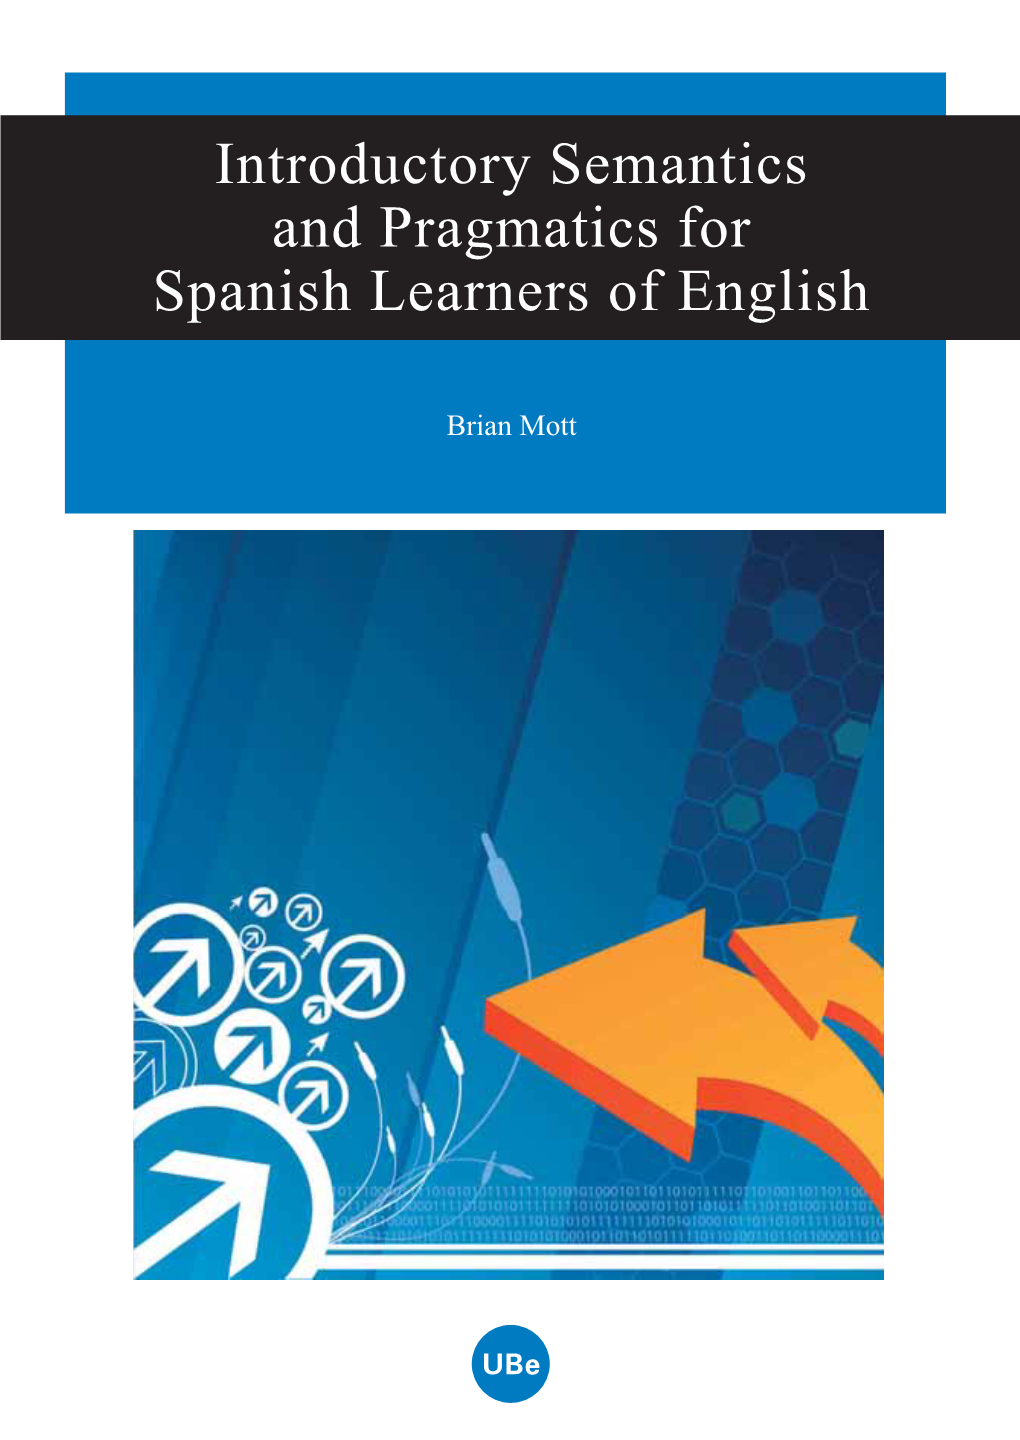 Introductory Semantics and Pragmatics for Spanish Learners of English